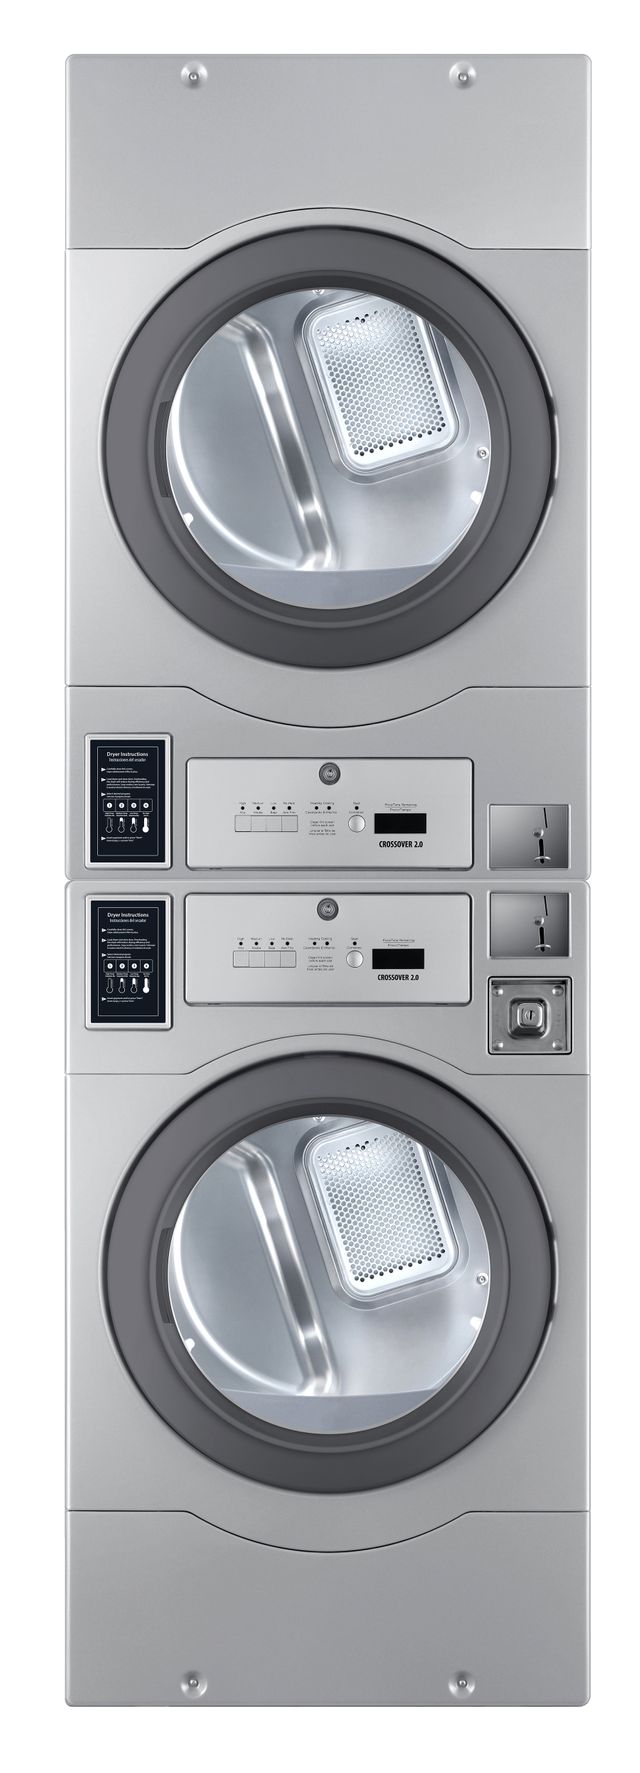 Crossover True Commercial Laundry - 7.0 Cu. Ft. Silver Heavy Duty Bottom Control Electric Dryer with Coin Option/Card Ready Included (Stacked application) 2